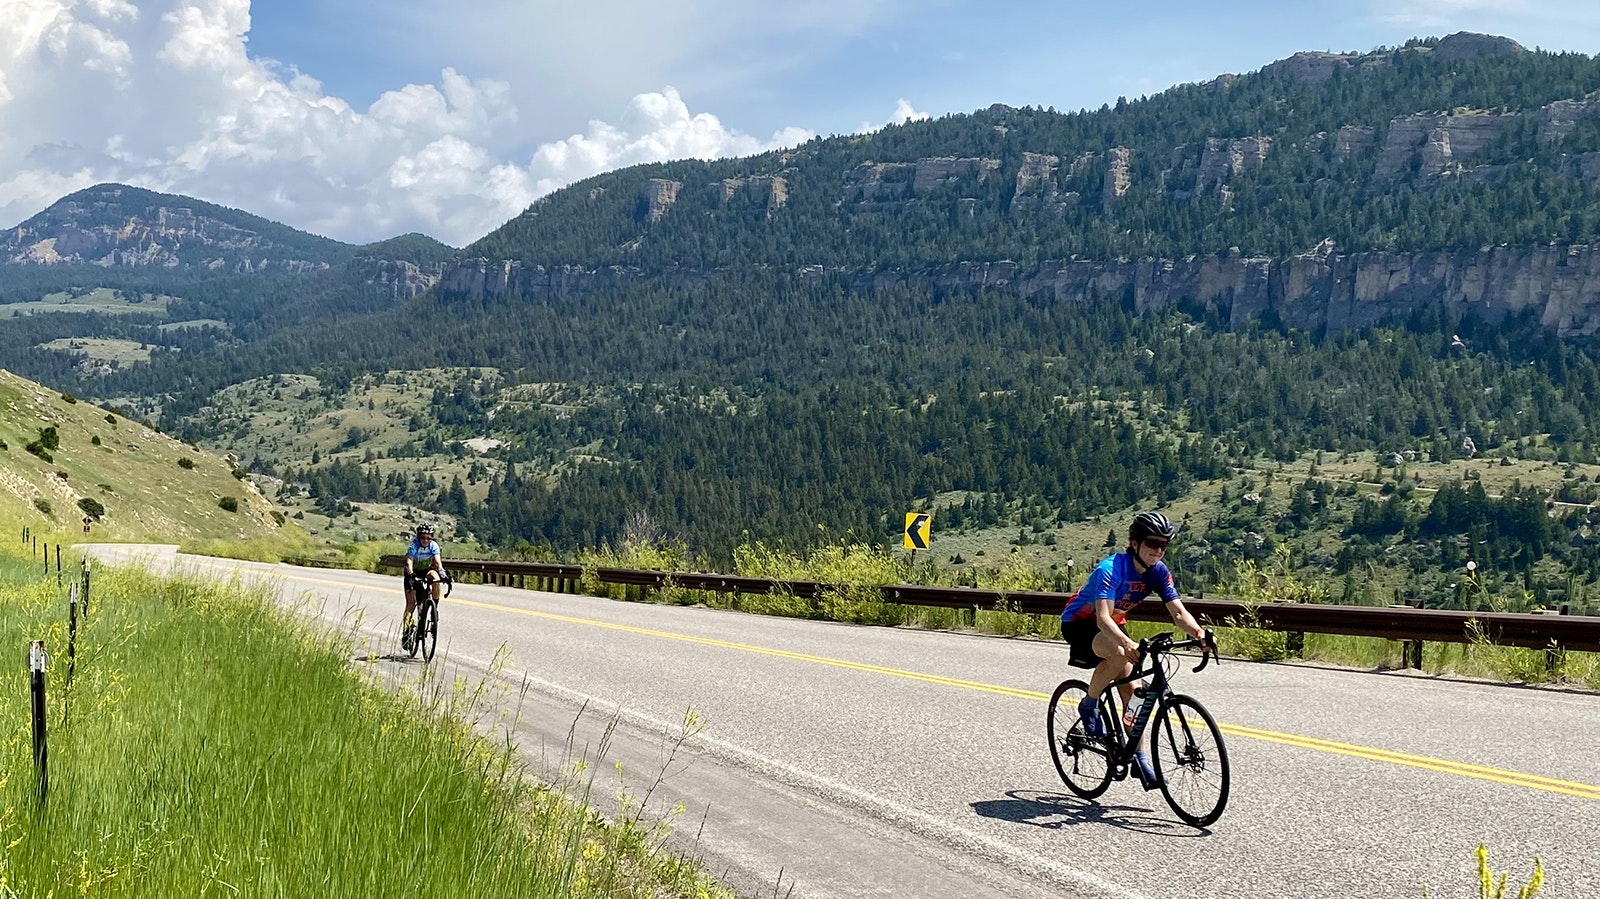 The Wyoming wilderness is the backdrop for the internationally popular Tour de Wyoming.